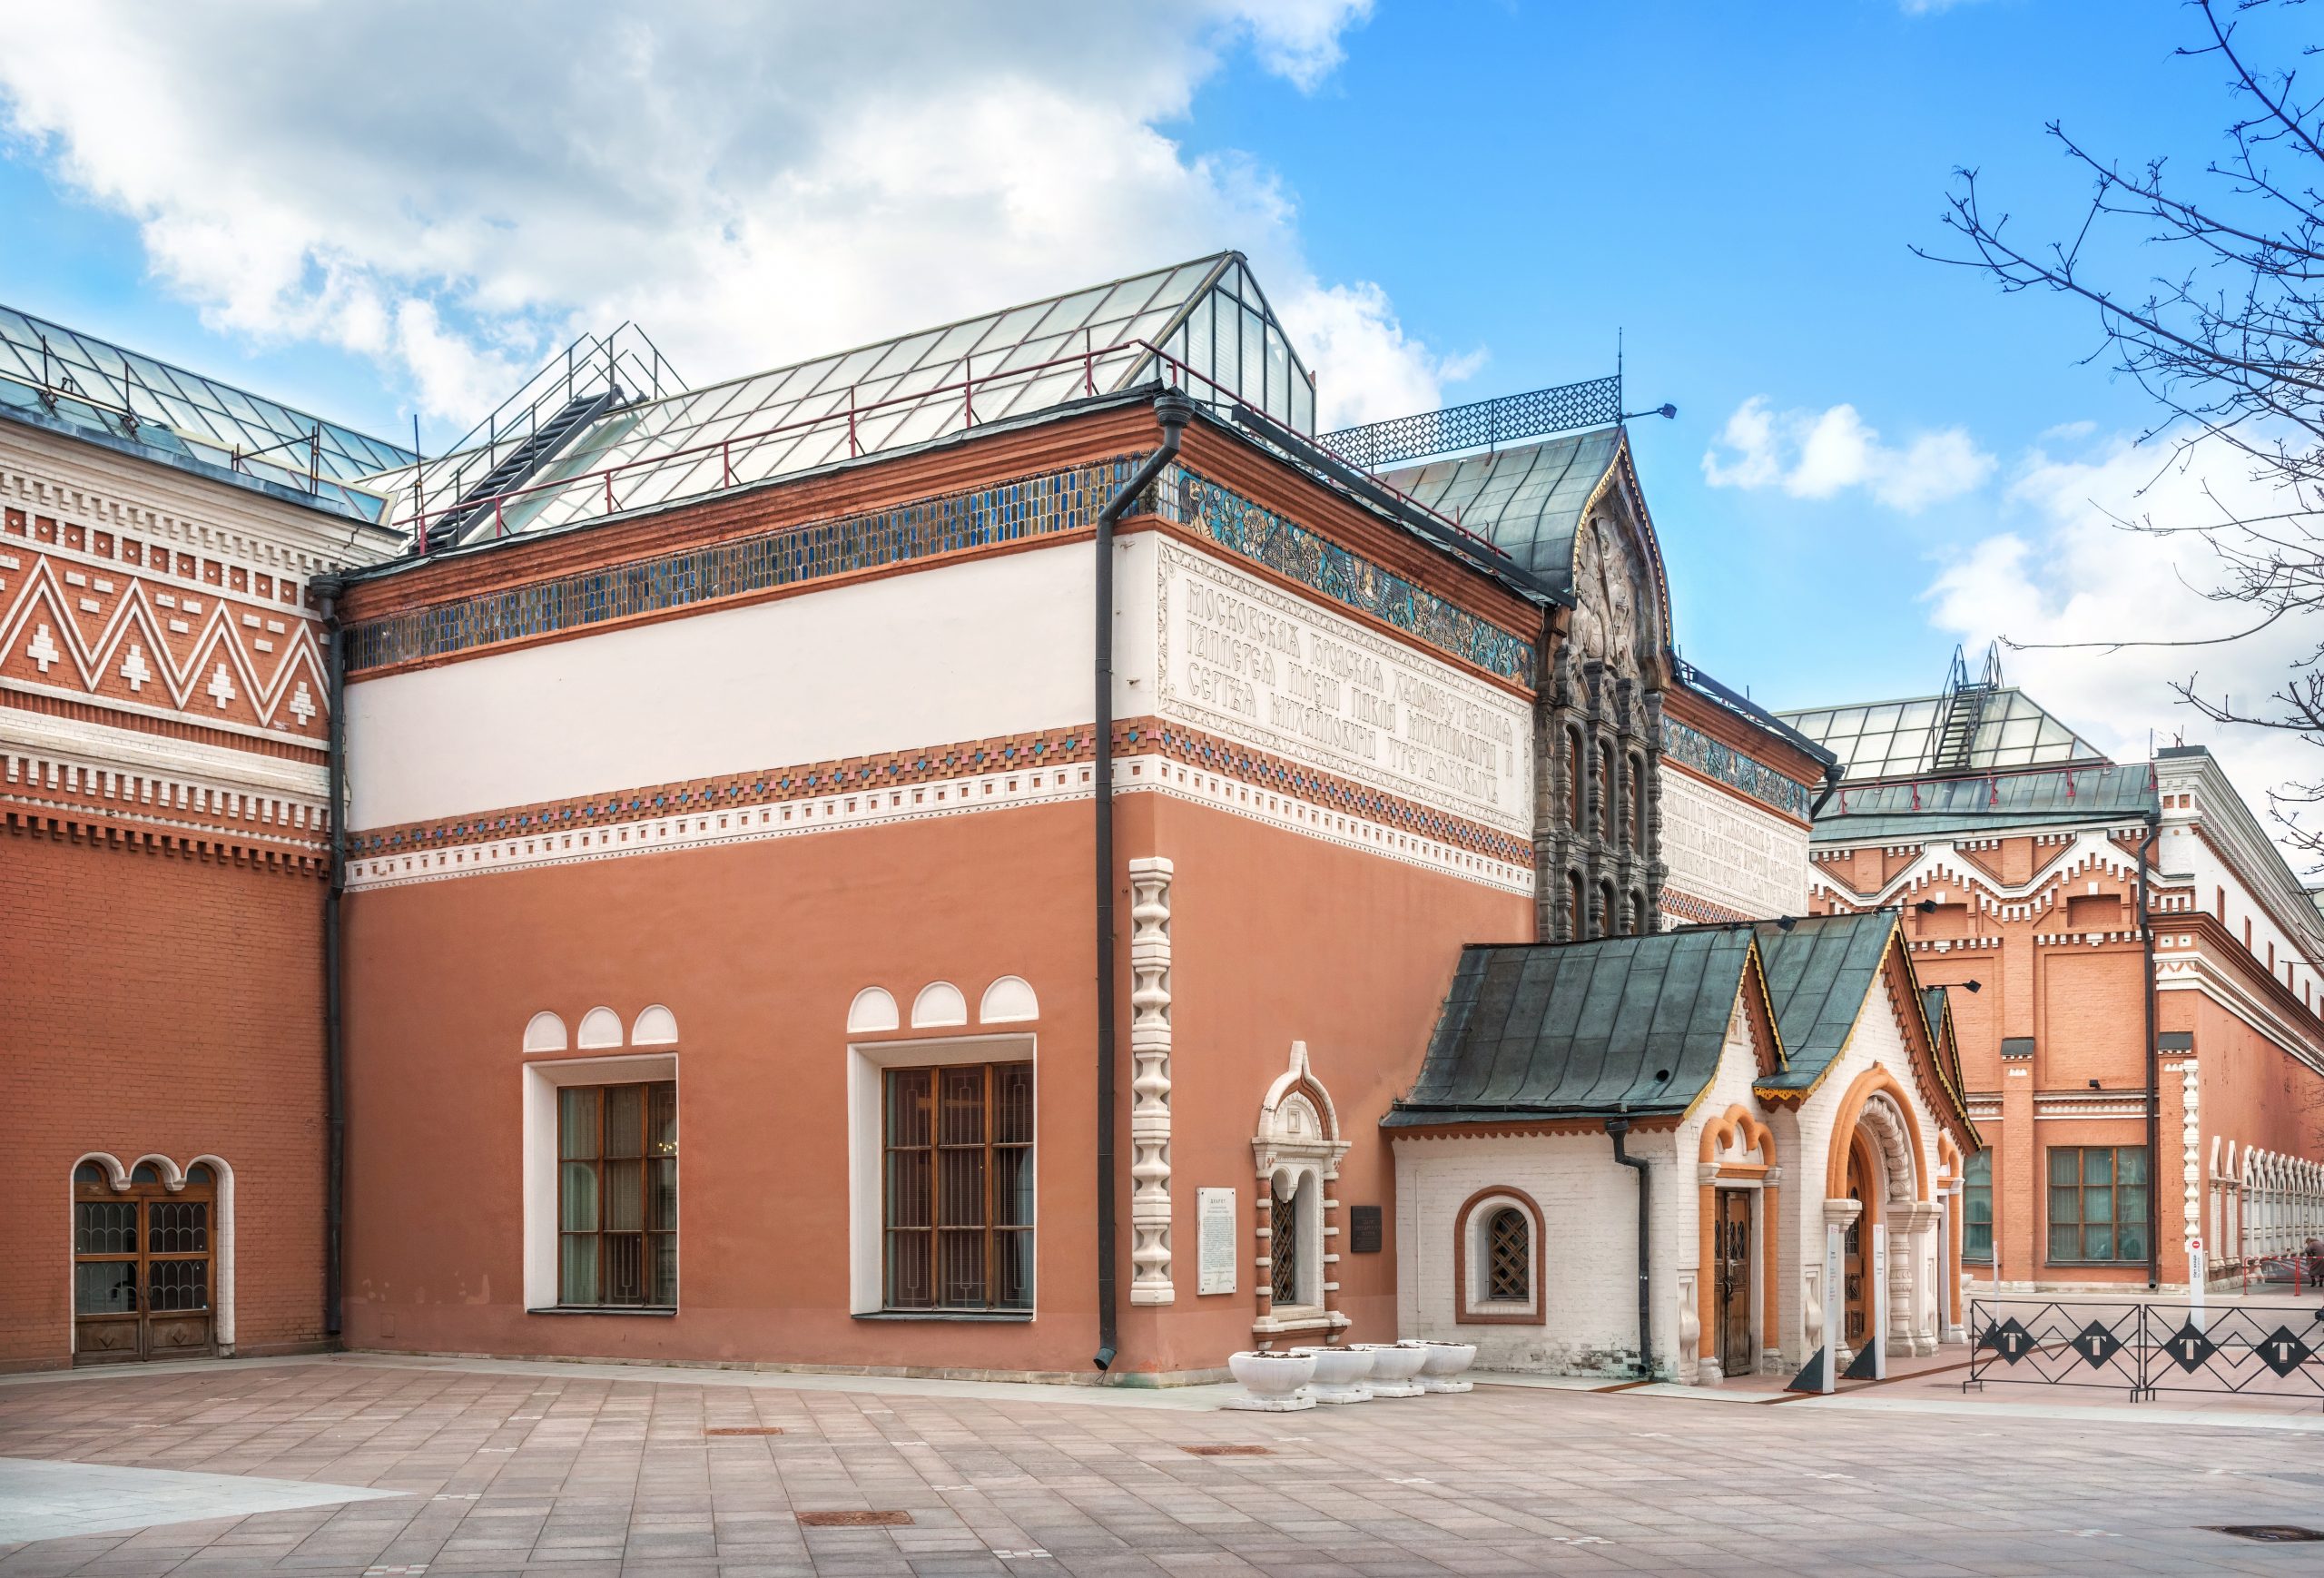 The,Building,Of,The,Tretyakov,Gallery,In,Moscow,On,A